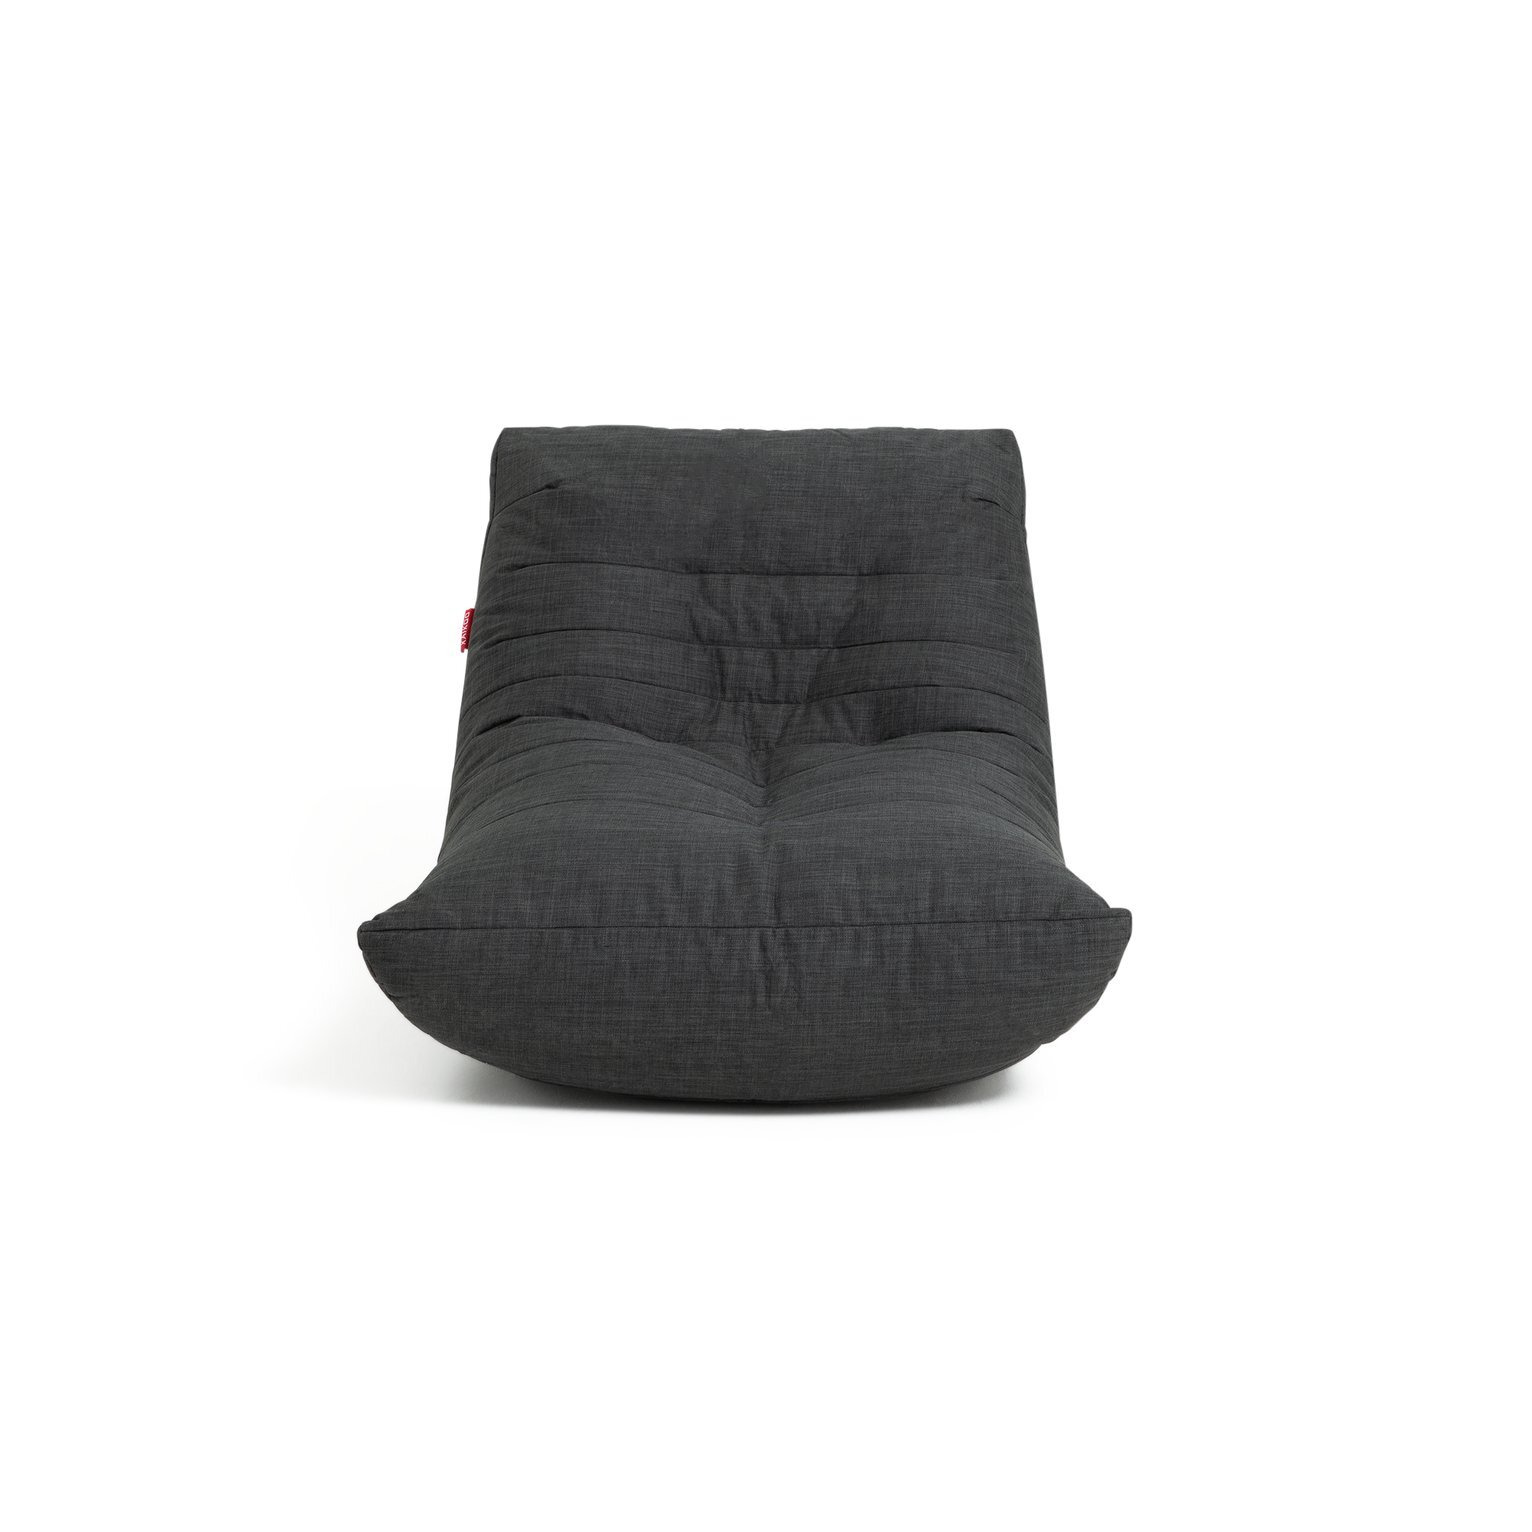 Kaikoo Fabric Beanbag Accent chair- Charcoal - image 1